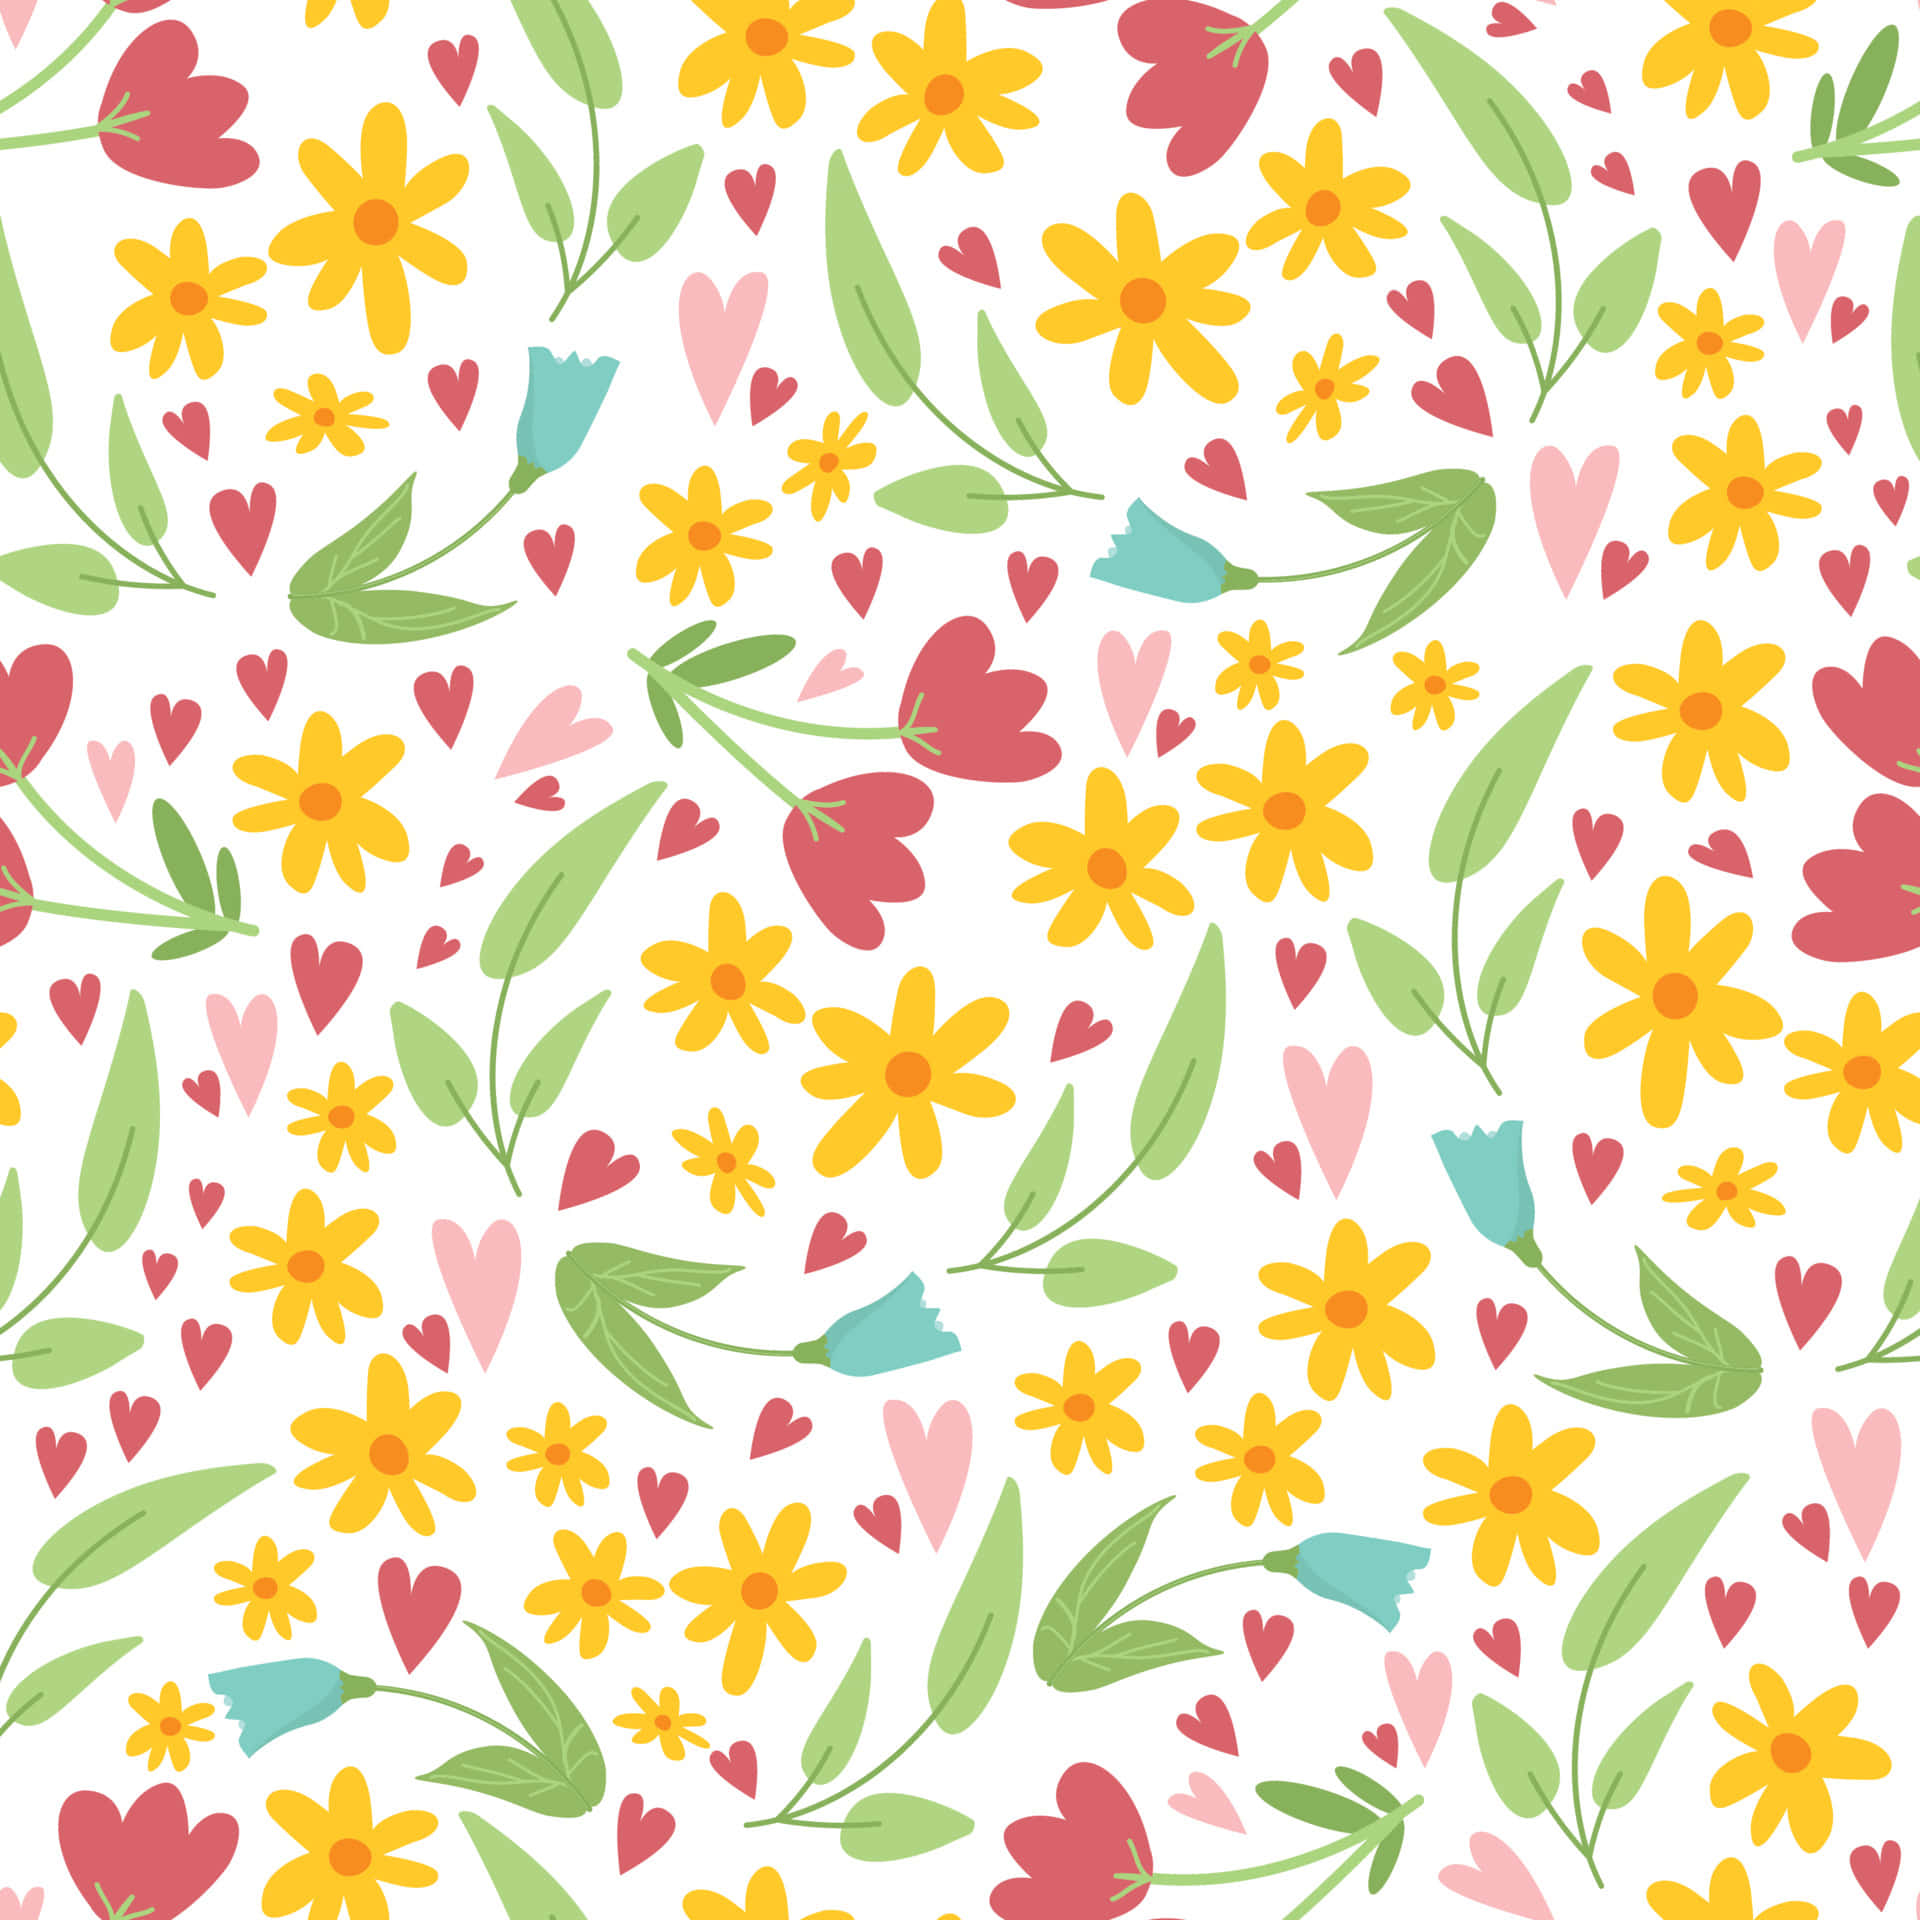 Enjoying the delights of Simple Spring Wallpaper